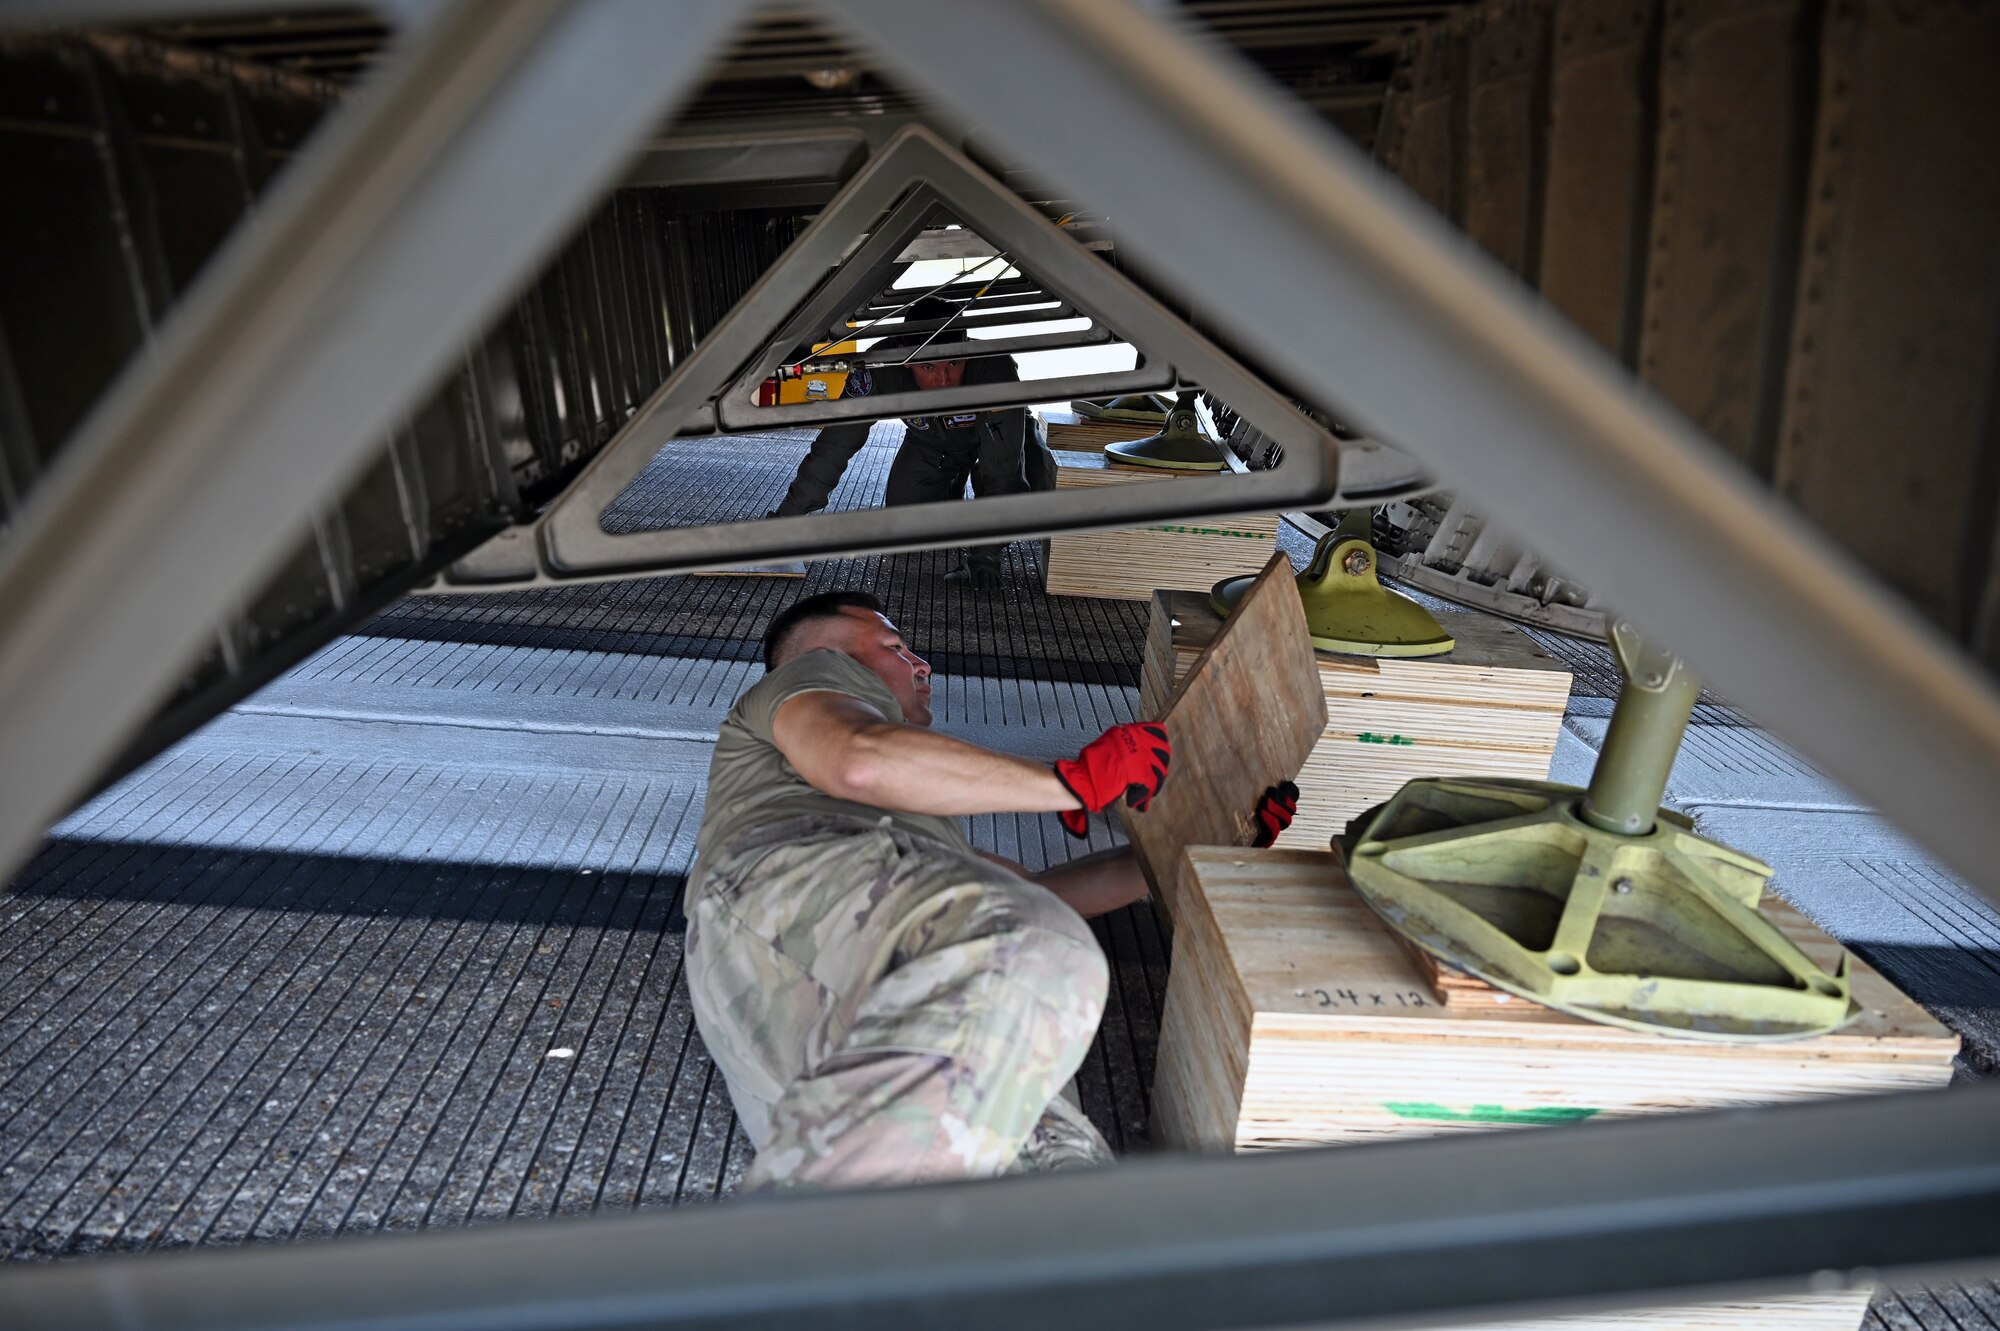 Reserve Citizen Airmen with the 68th Airlift Squadron place wooden supports under the ramp of a C-5M Super Galaxy aircraft at Naval Air Station Joint Reserve Base New Orleans, Louisiana, Sept. 13, 2022. Marines in the Marine Light Attack Helicopter Squadron – 773, Det. Alpha specifically engineered the wooden boxes and planks to load and offload two helicopters, the Bell AH-1Z Viper and UH-1Y Venom, onto the C-5M Super Galaxy aircraft. (U.S. Air Force photo by Staff Sgt. Monet Villacorte)